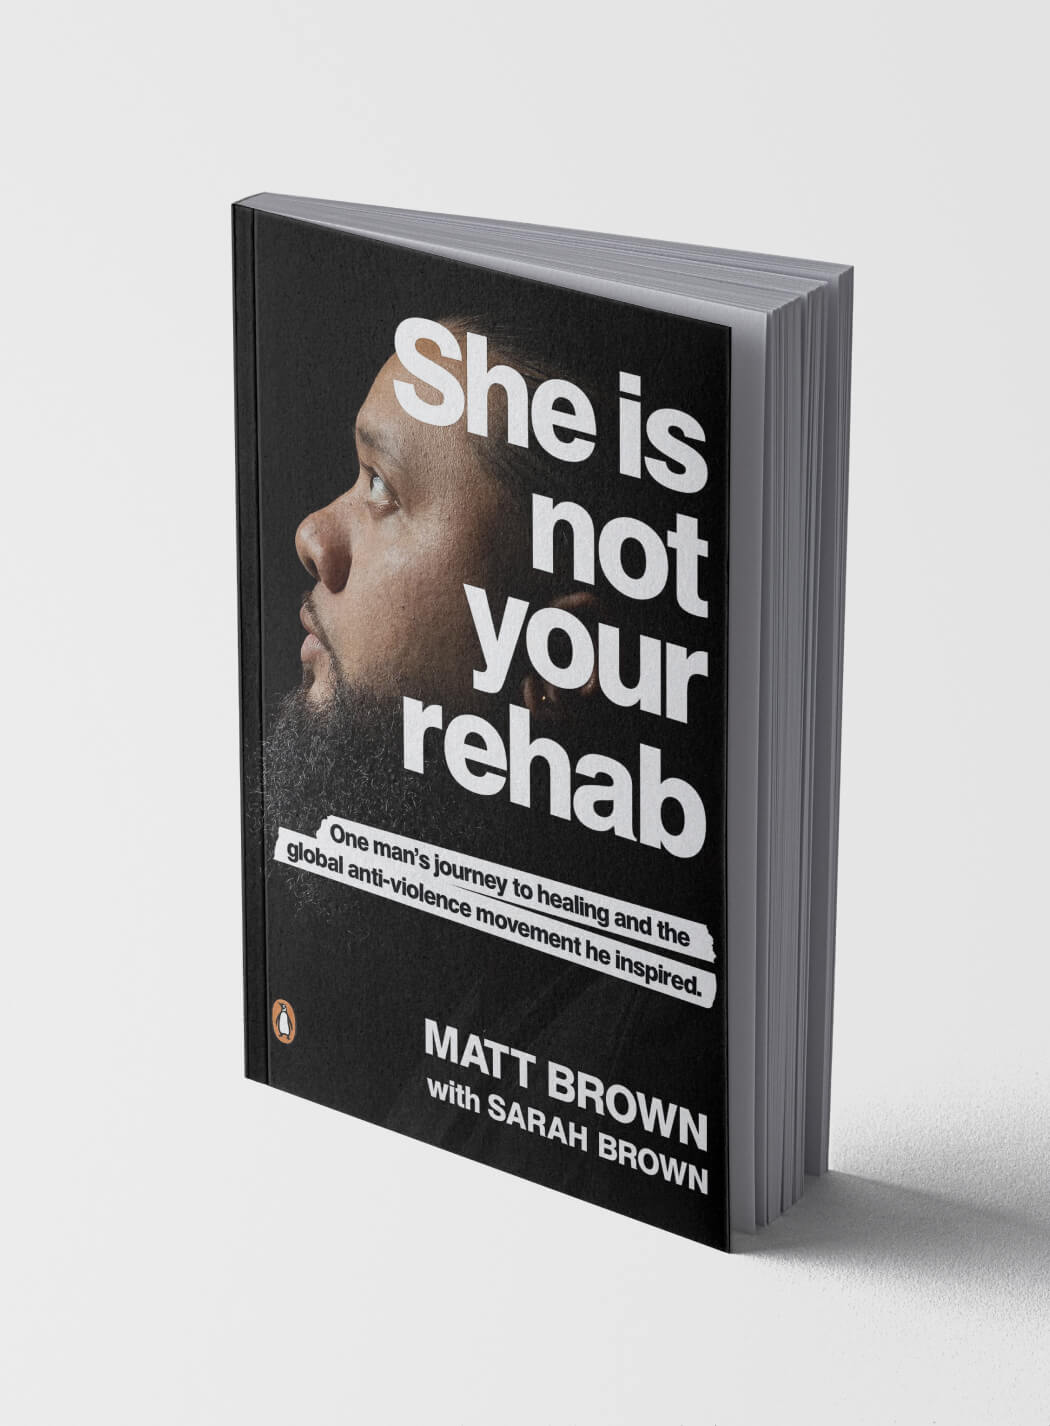 She is not your rehab